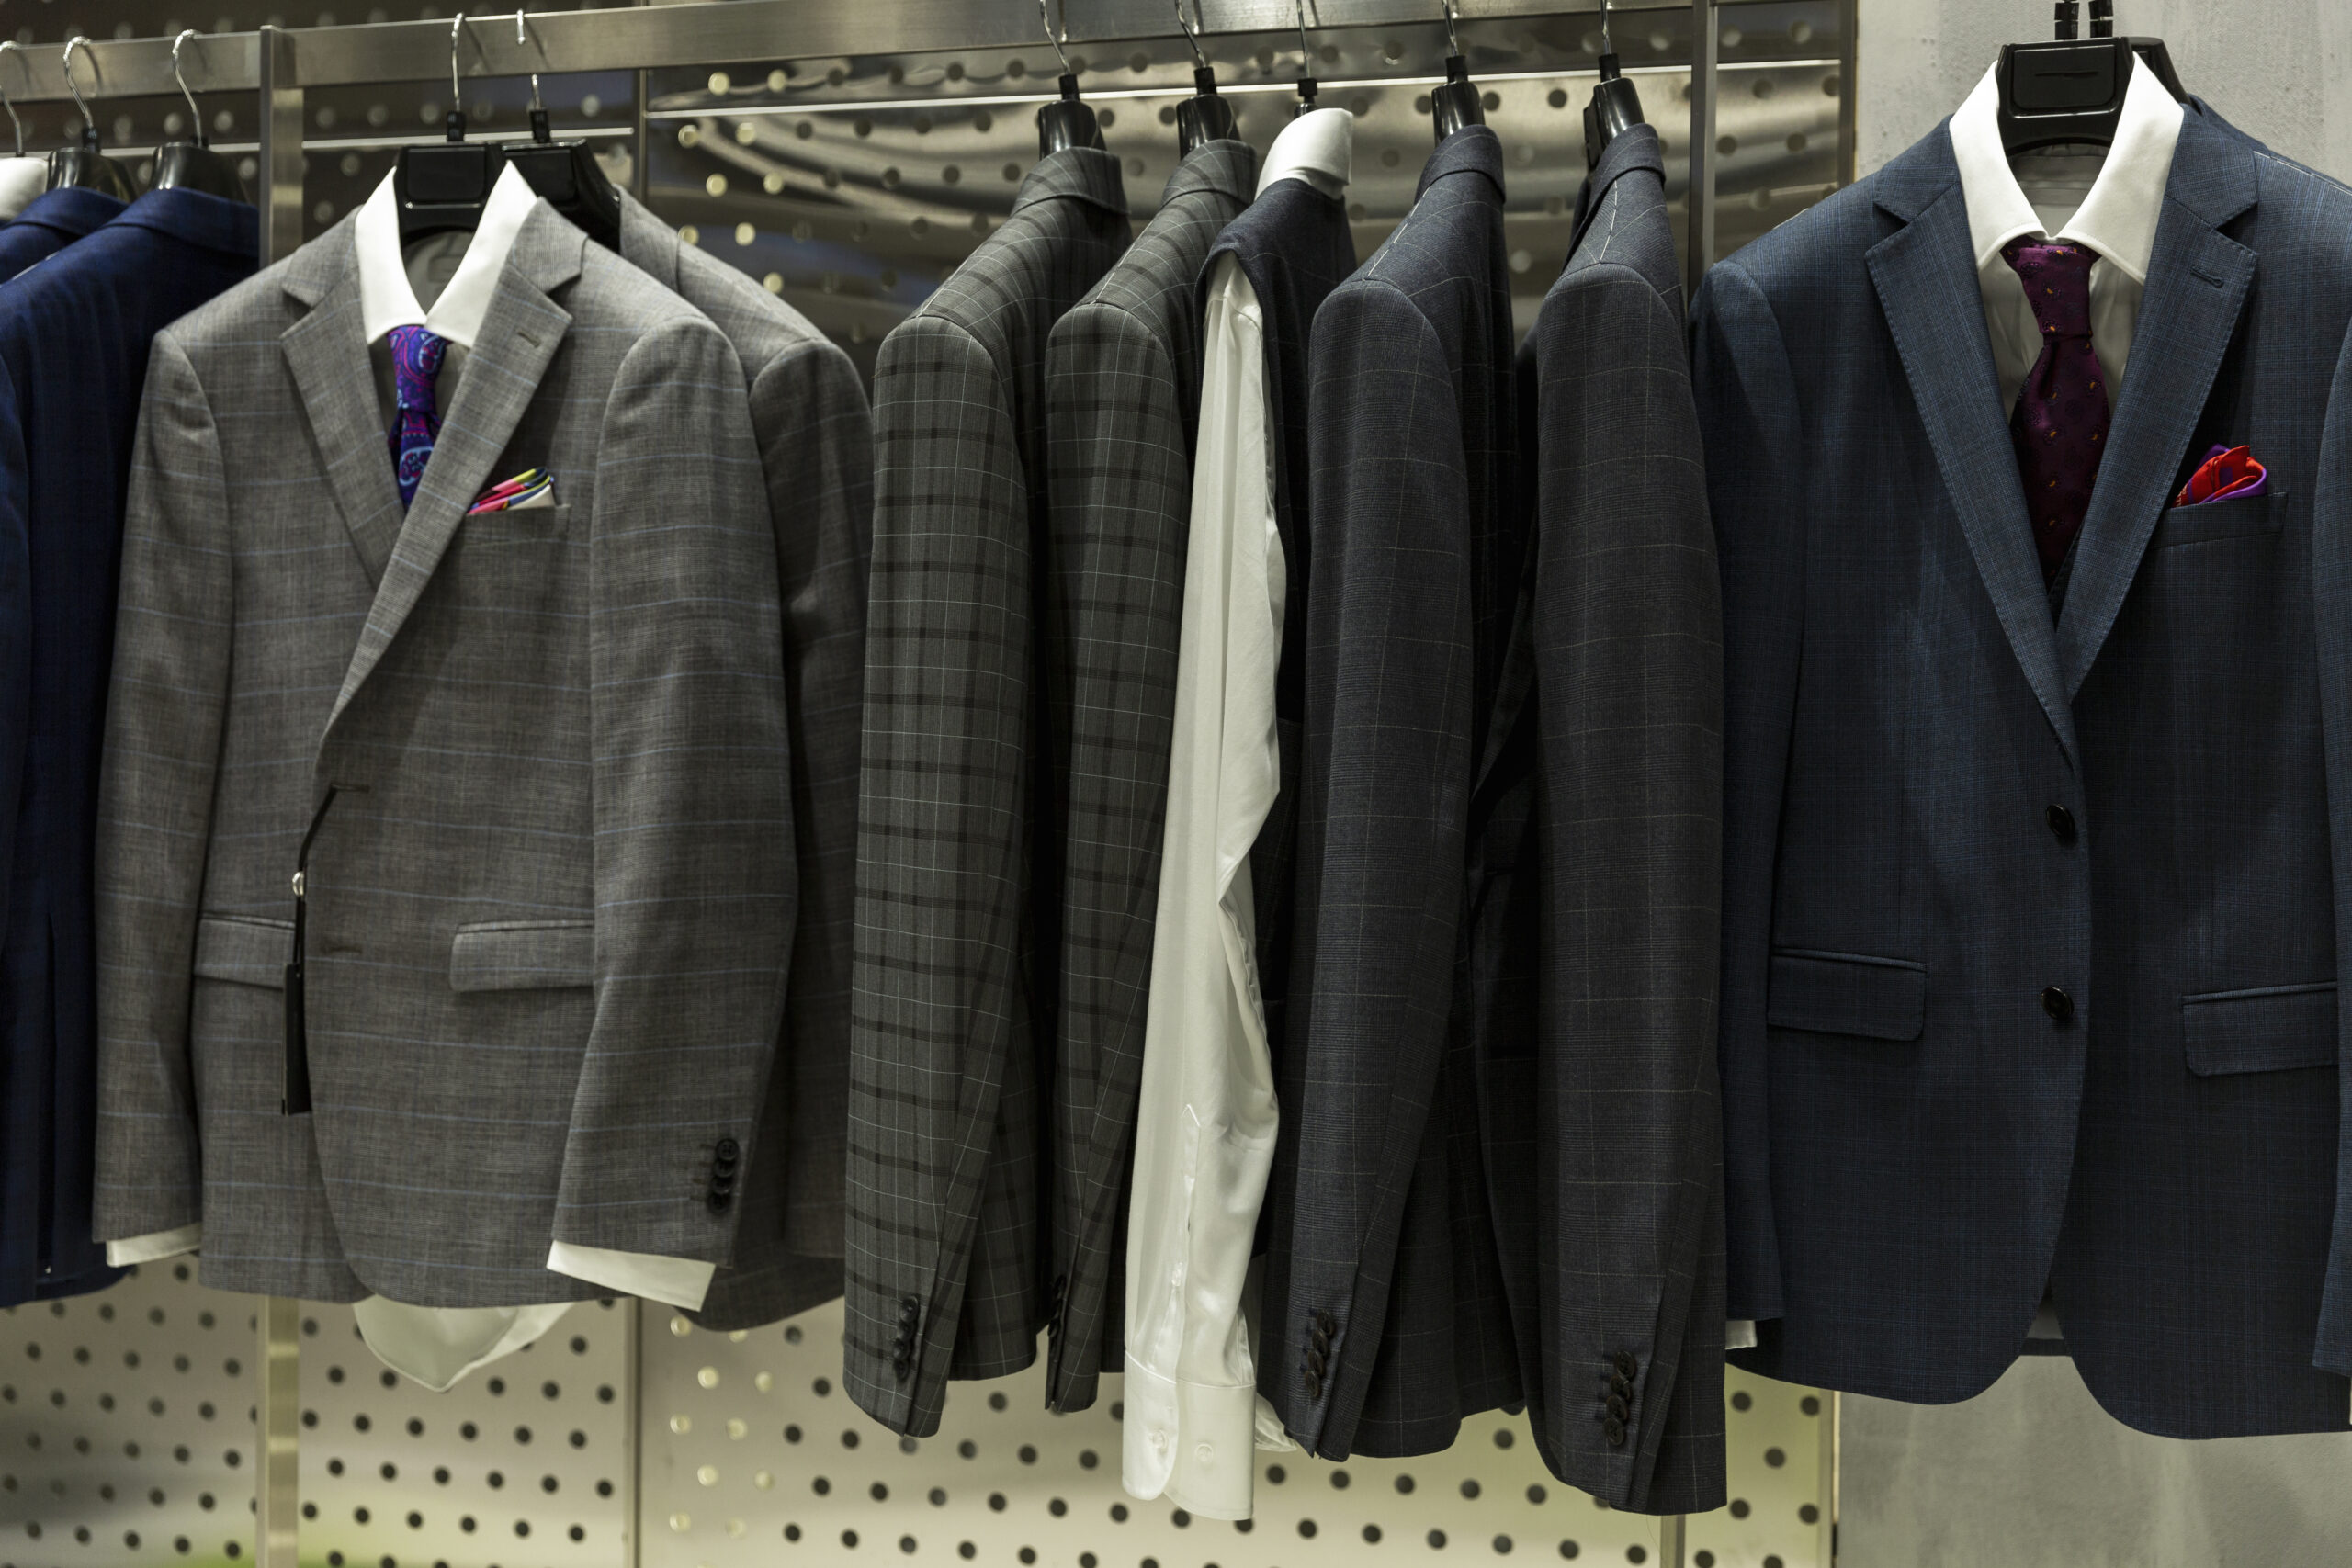 Stylish men's suits on hangers in the store. Front view. Eleganc